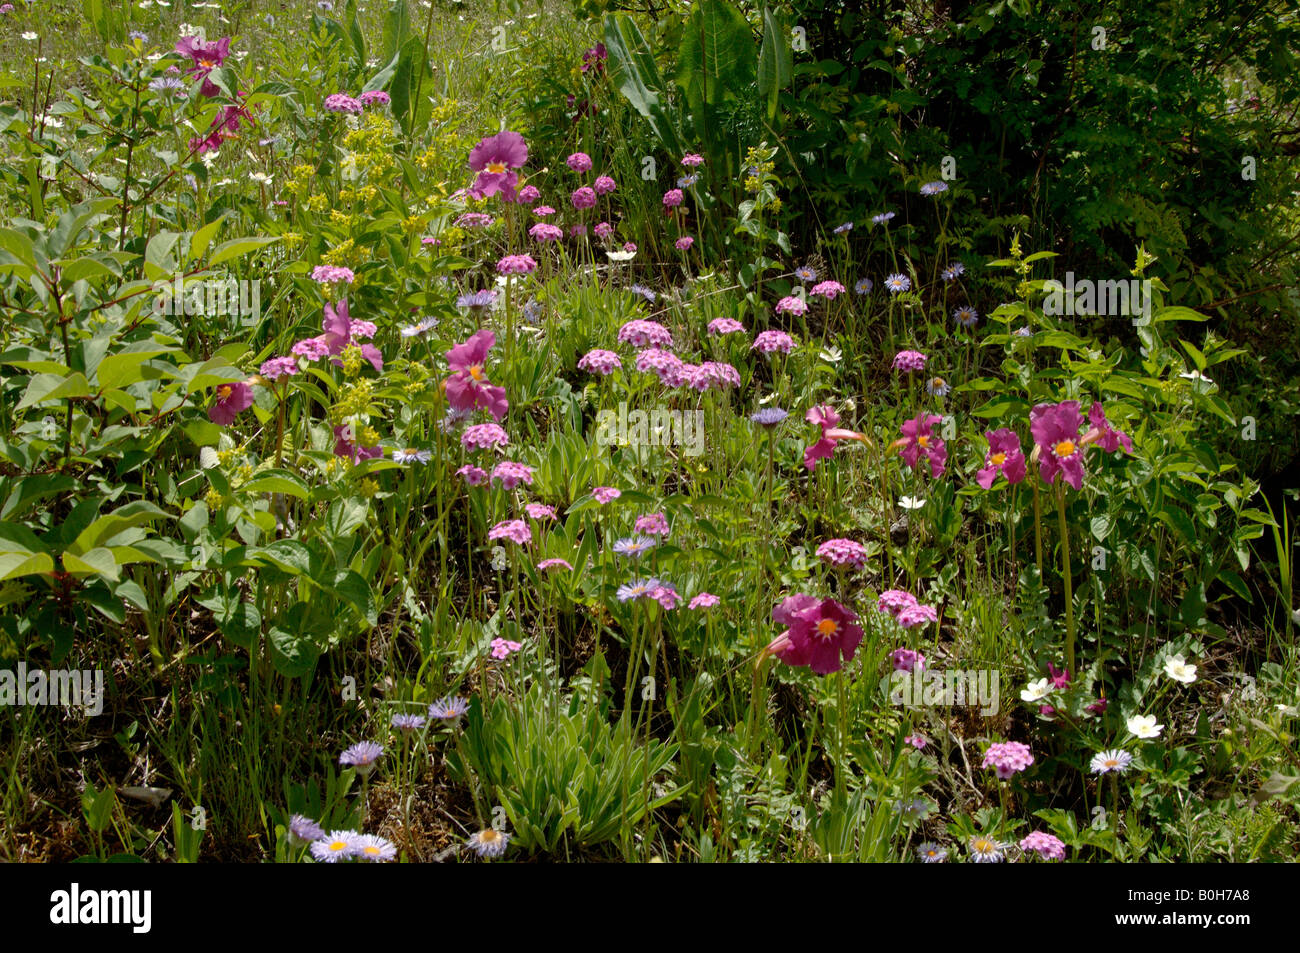 Wildflowers garden Napa Hai NR Yunnan China include Incarvillea Aster and Androsace Stock Photo